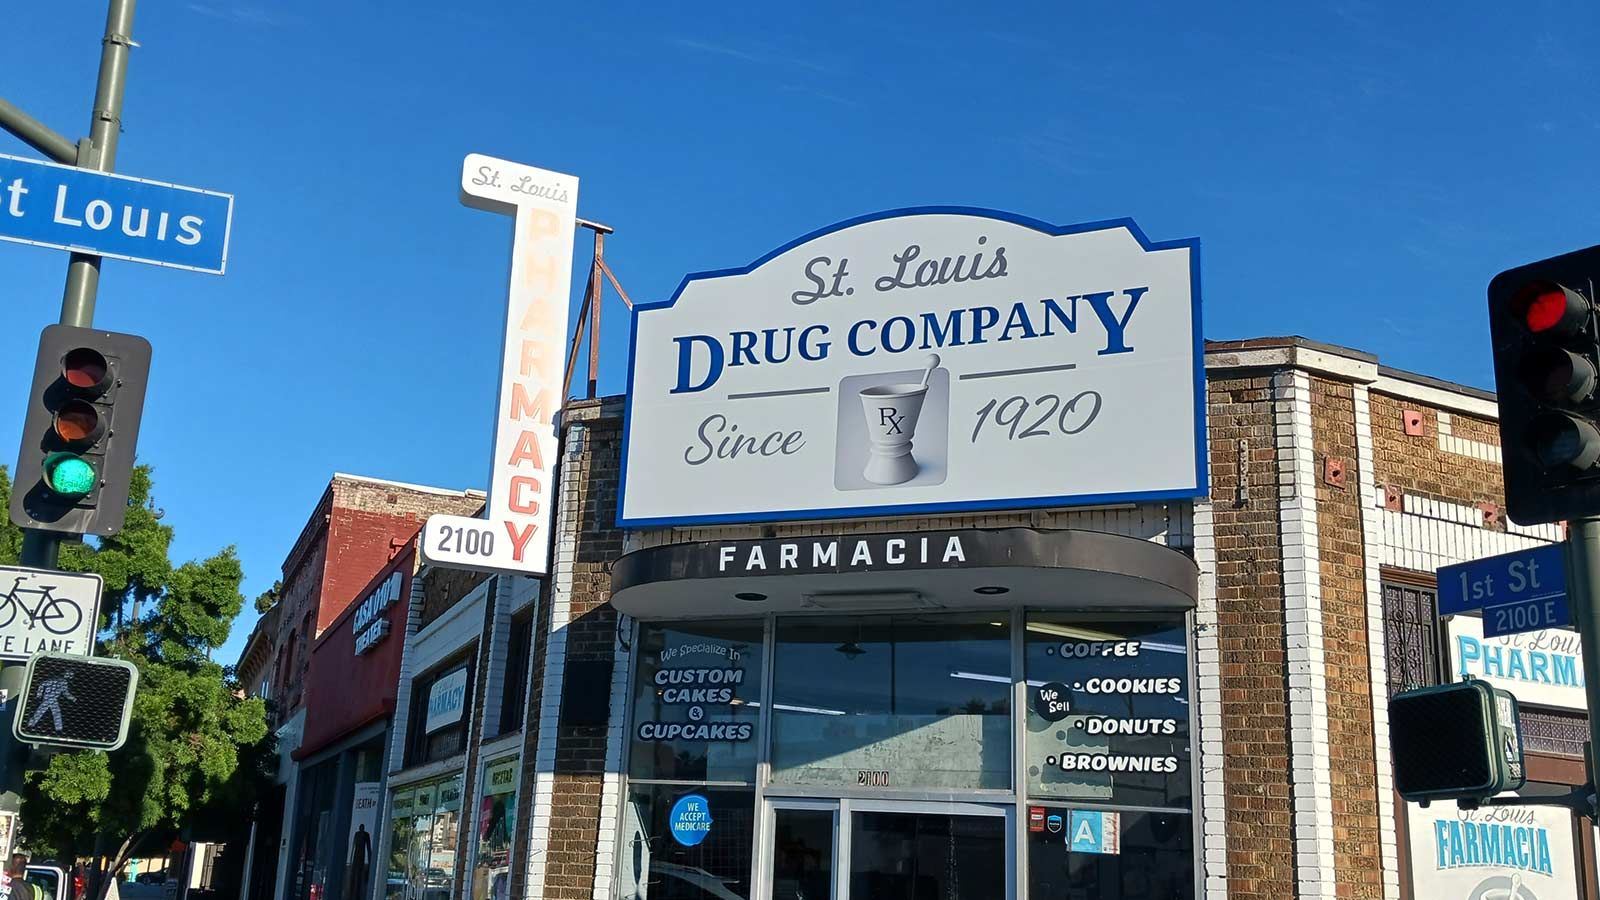 St Louis Drug Company outdoor signs mounted on the building